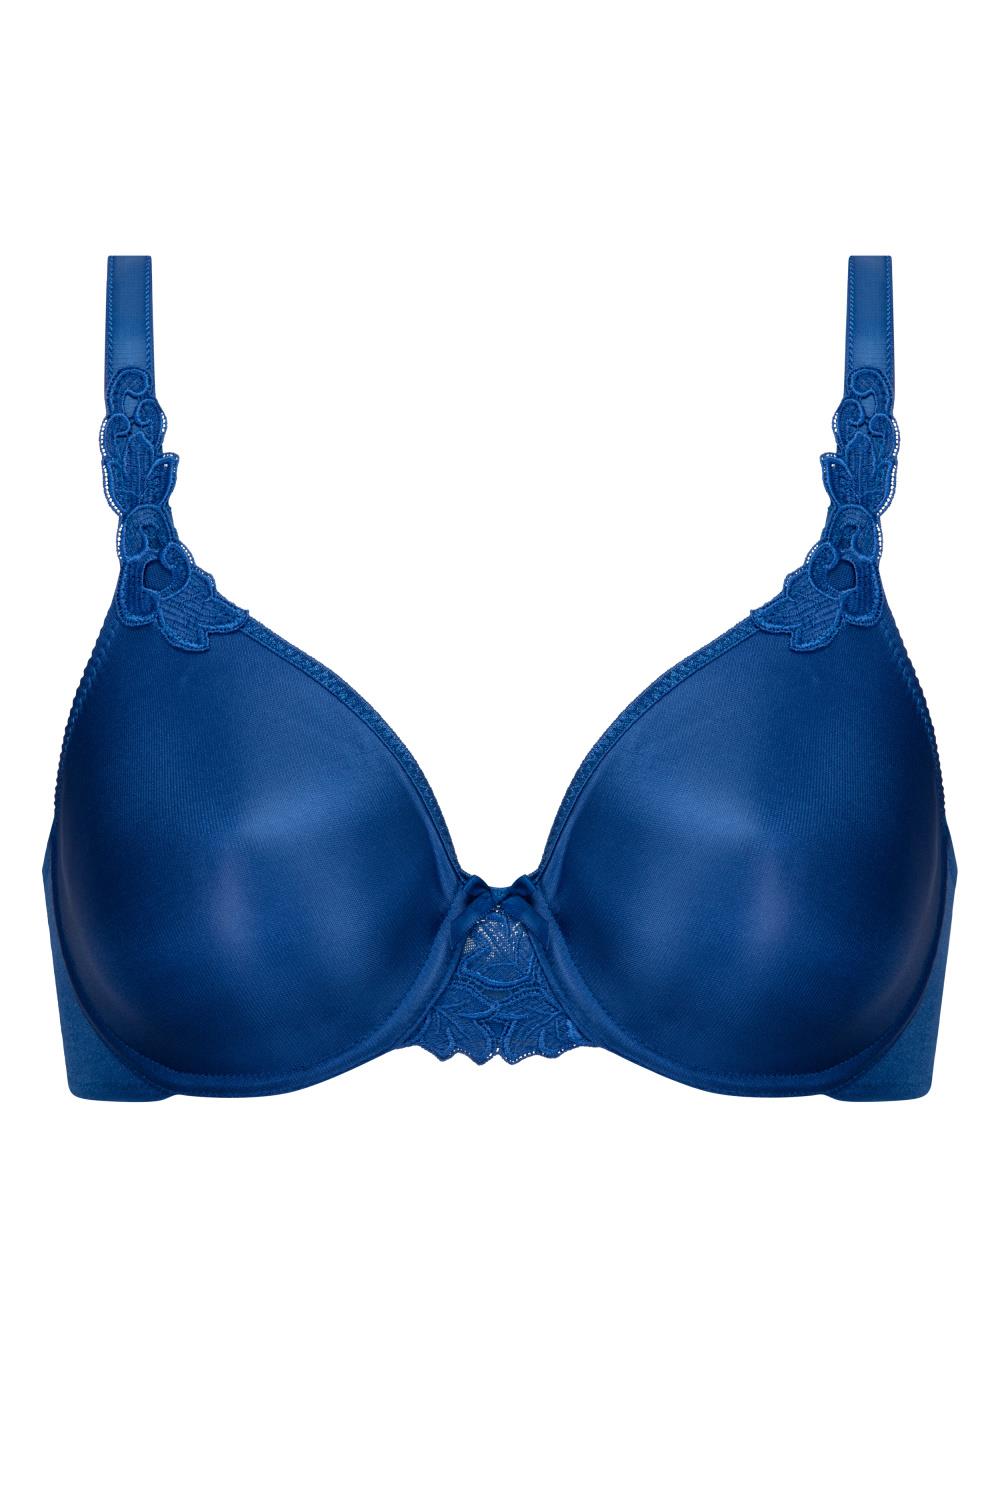 Chantelle Hedona Moulded Underwired Bra, Bleu du Nord – My Top